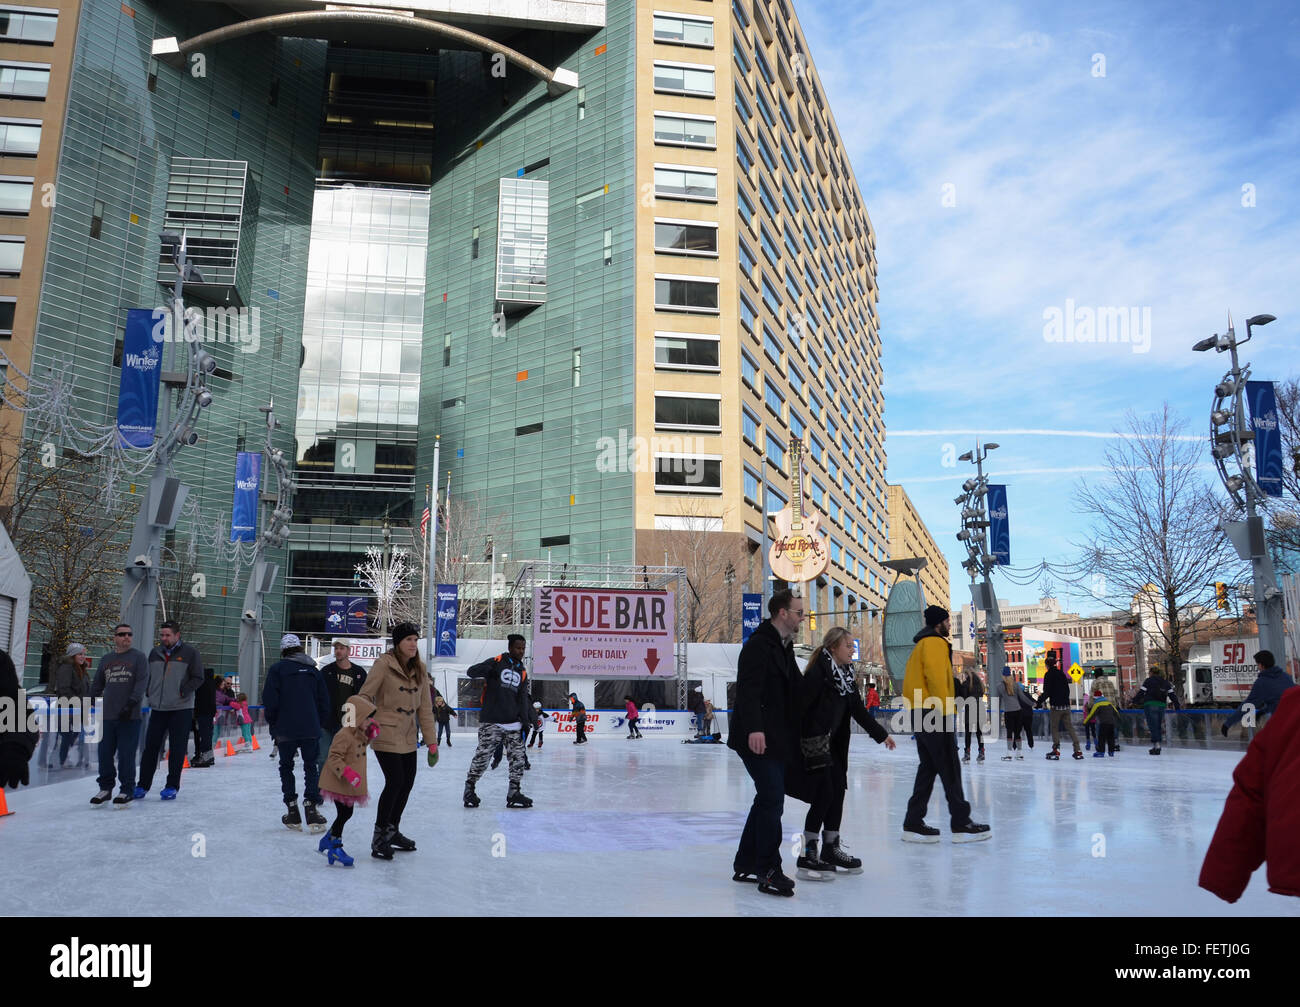 DETROIT, MI - DECEMBER 24: People skate in the rink at Campus Martius park in downtown Detroit, MI, on December 24, 2015. Stock Photo